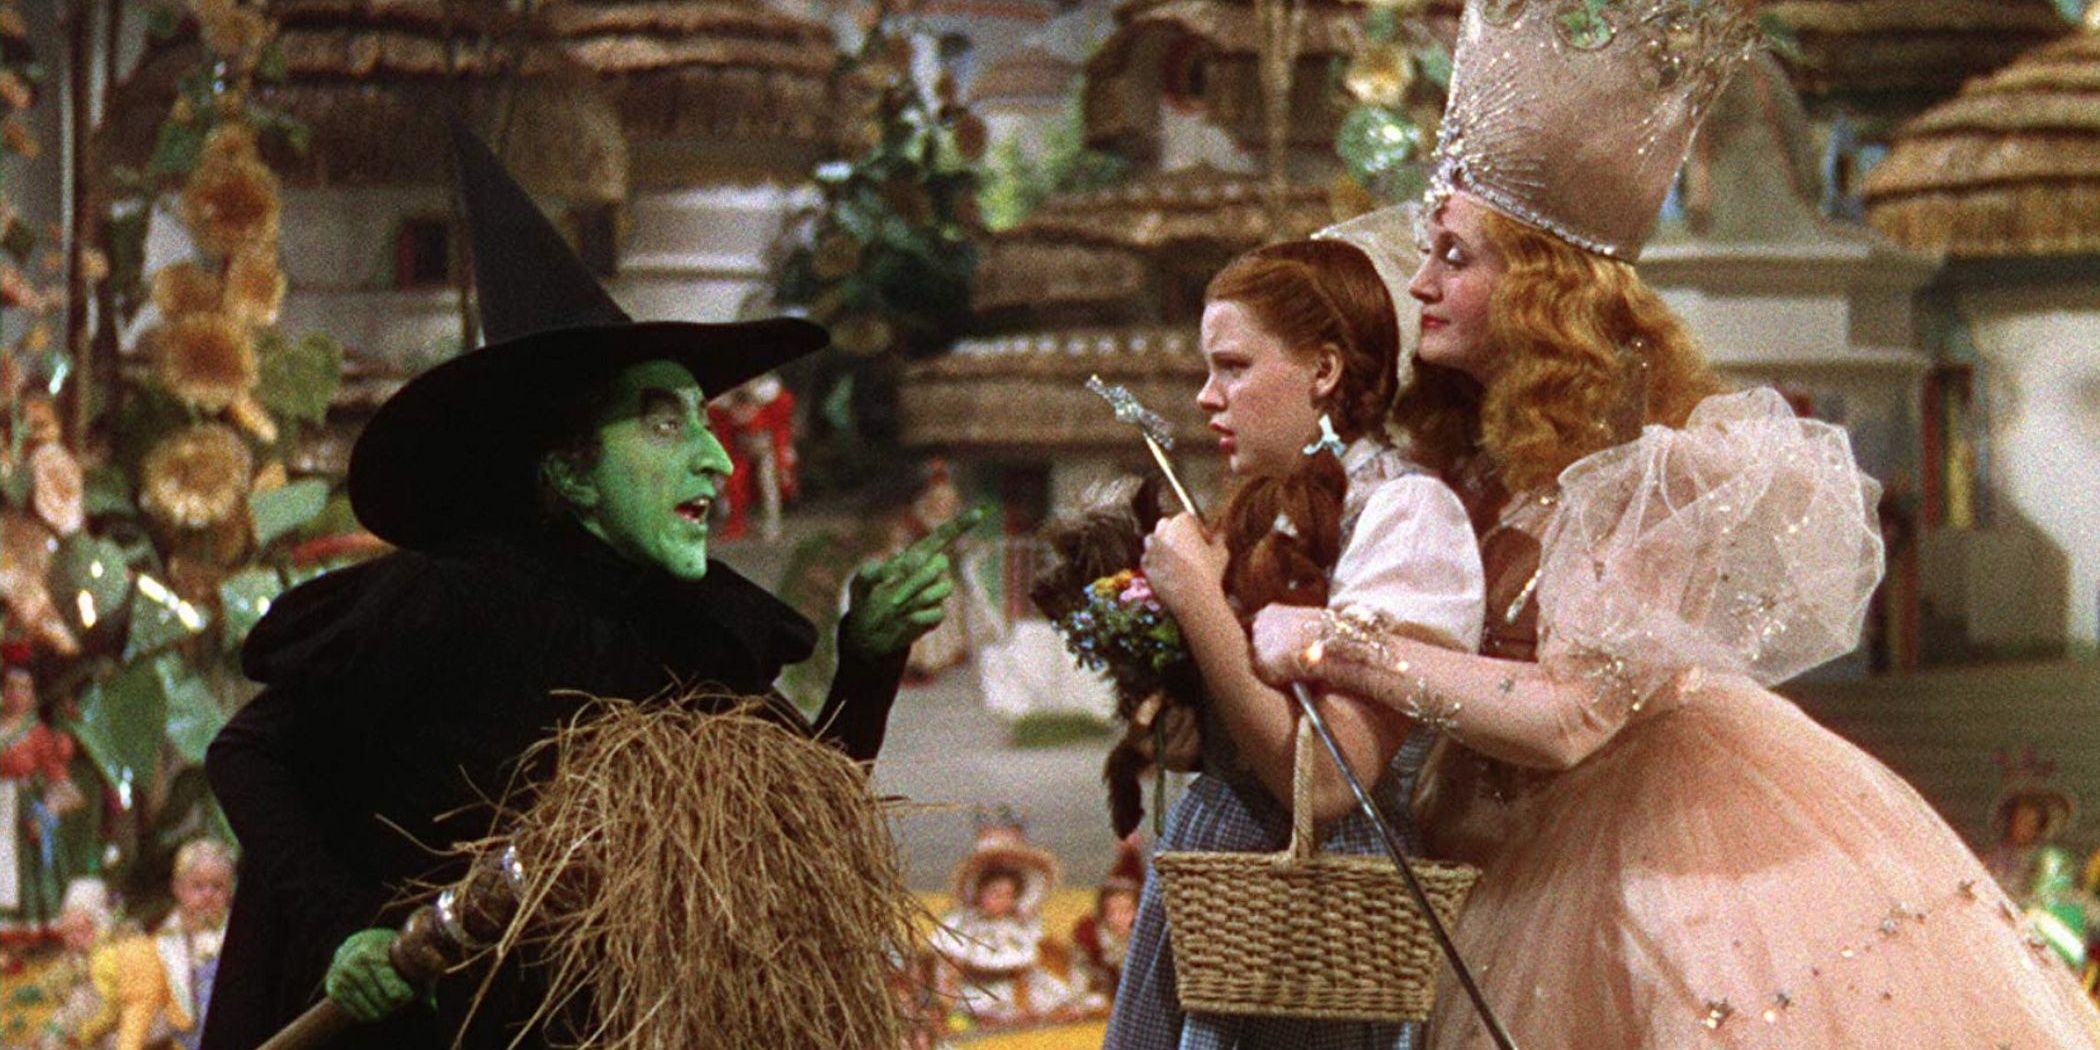 The Wicked Witch of the West confronts Dorothy and Glinda in The Wizard of Oz